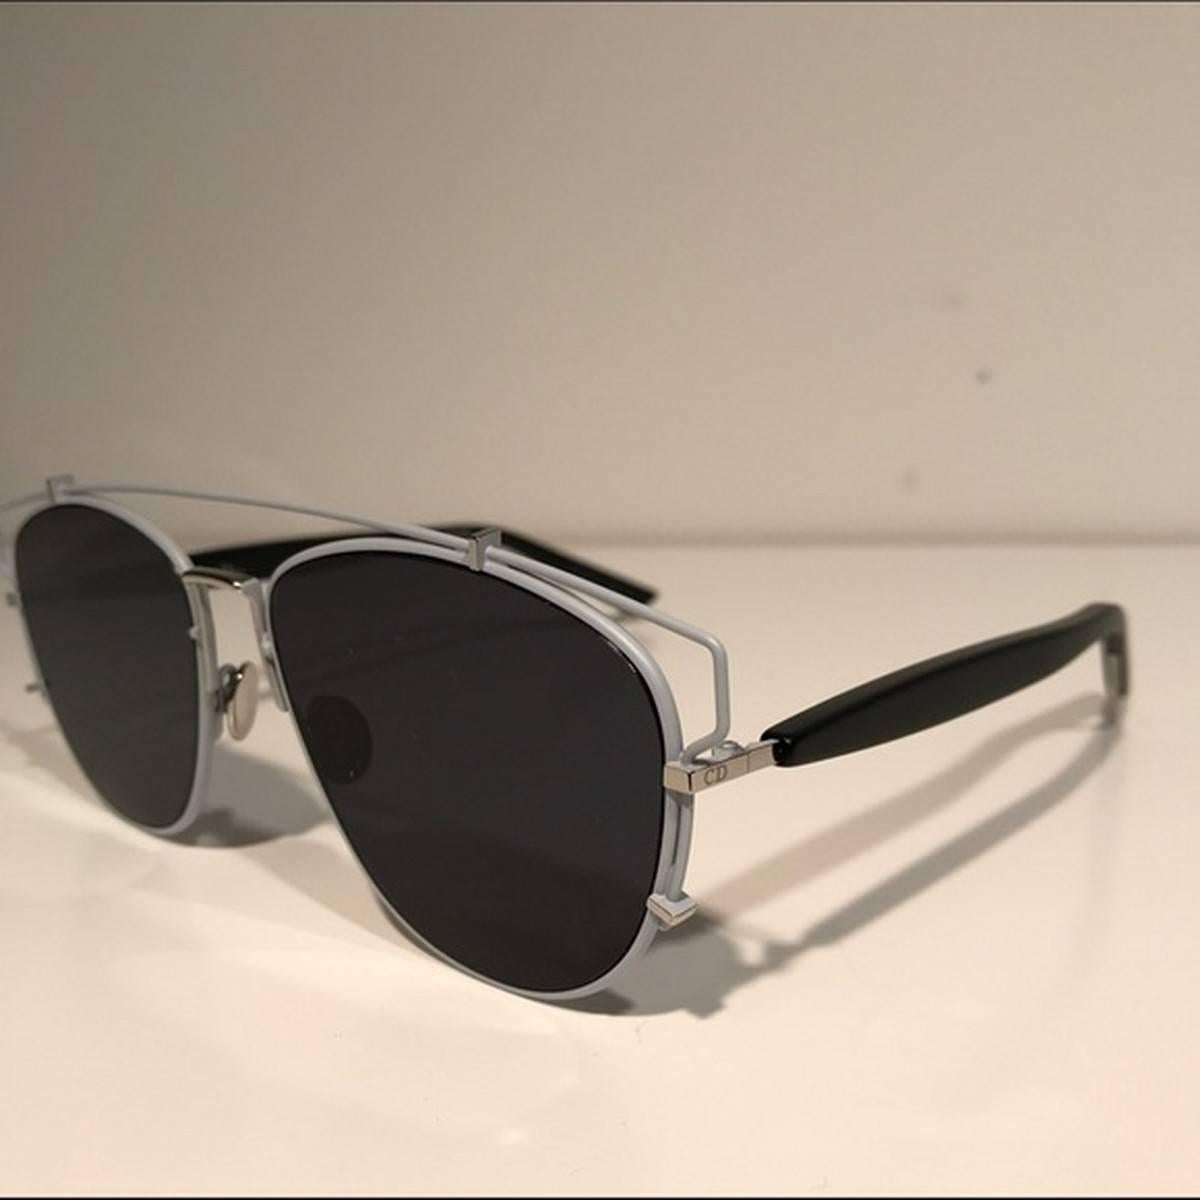 Dior Black White Mirrored Technologic Sunglasses
Color: Black/White
Size: OS

Brand new with box.
Unused condition.
No flaws.
Made in Italy.